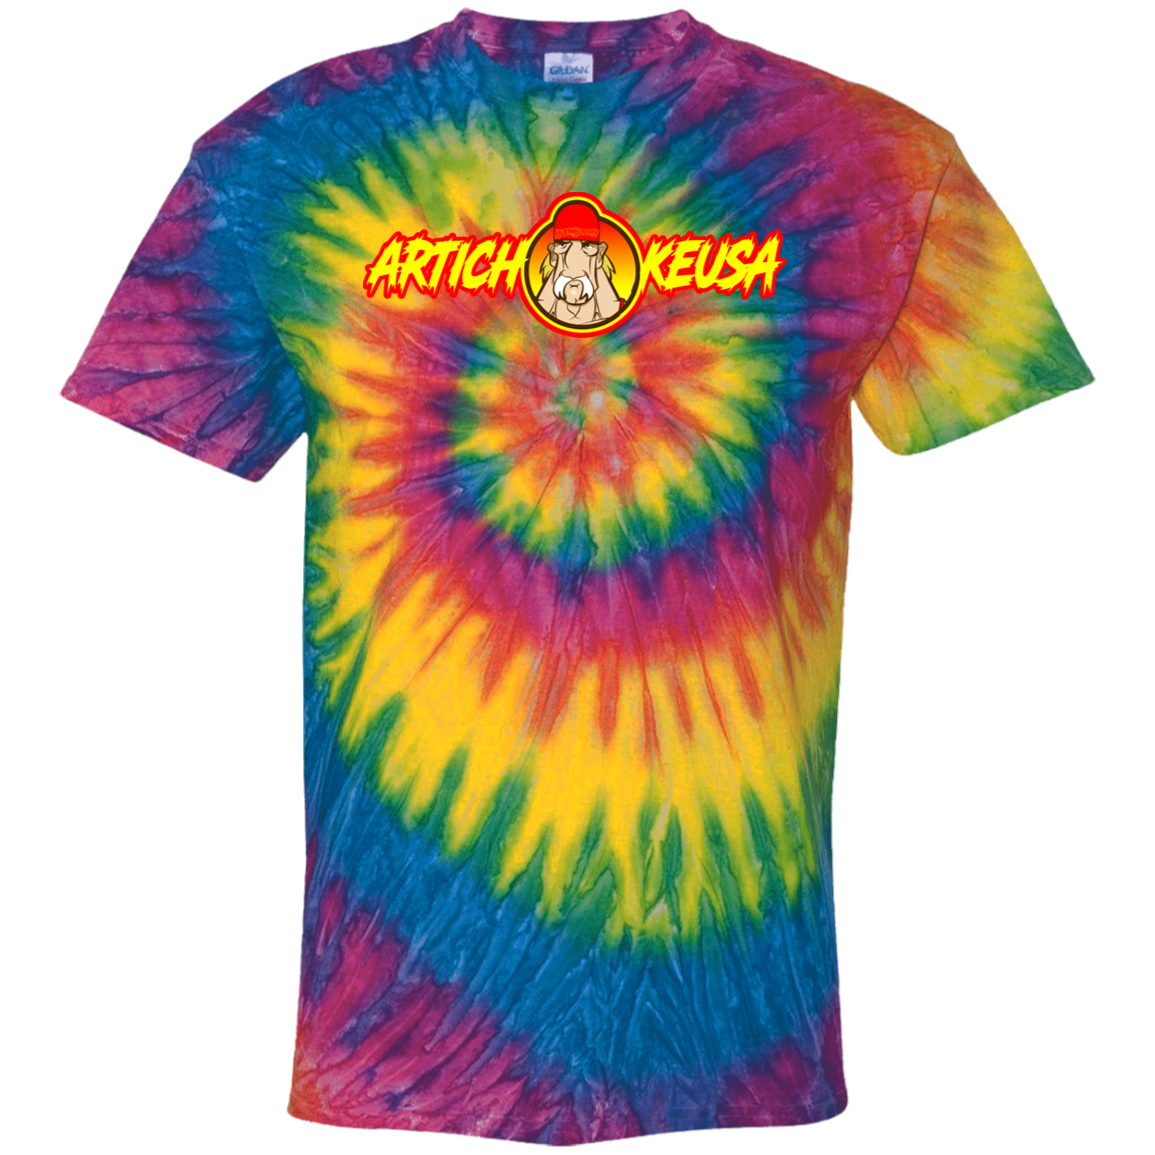 ArtichokeUSA Character and Font Design. Let’s Create Your Own Design Today. Fan Art. The Hulkster. Youth Tie Dye T-Shirt